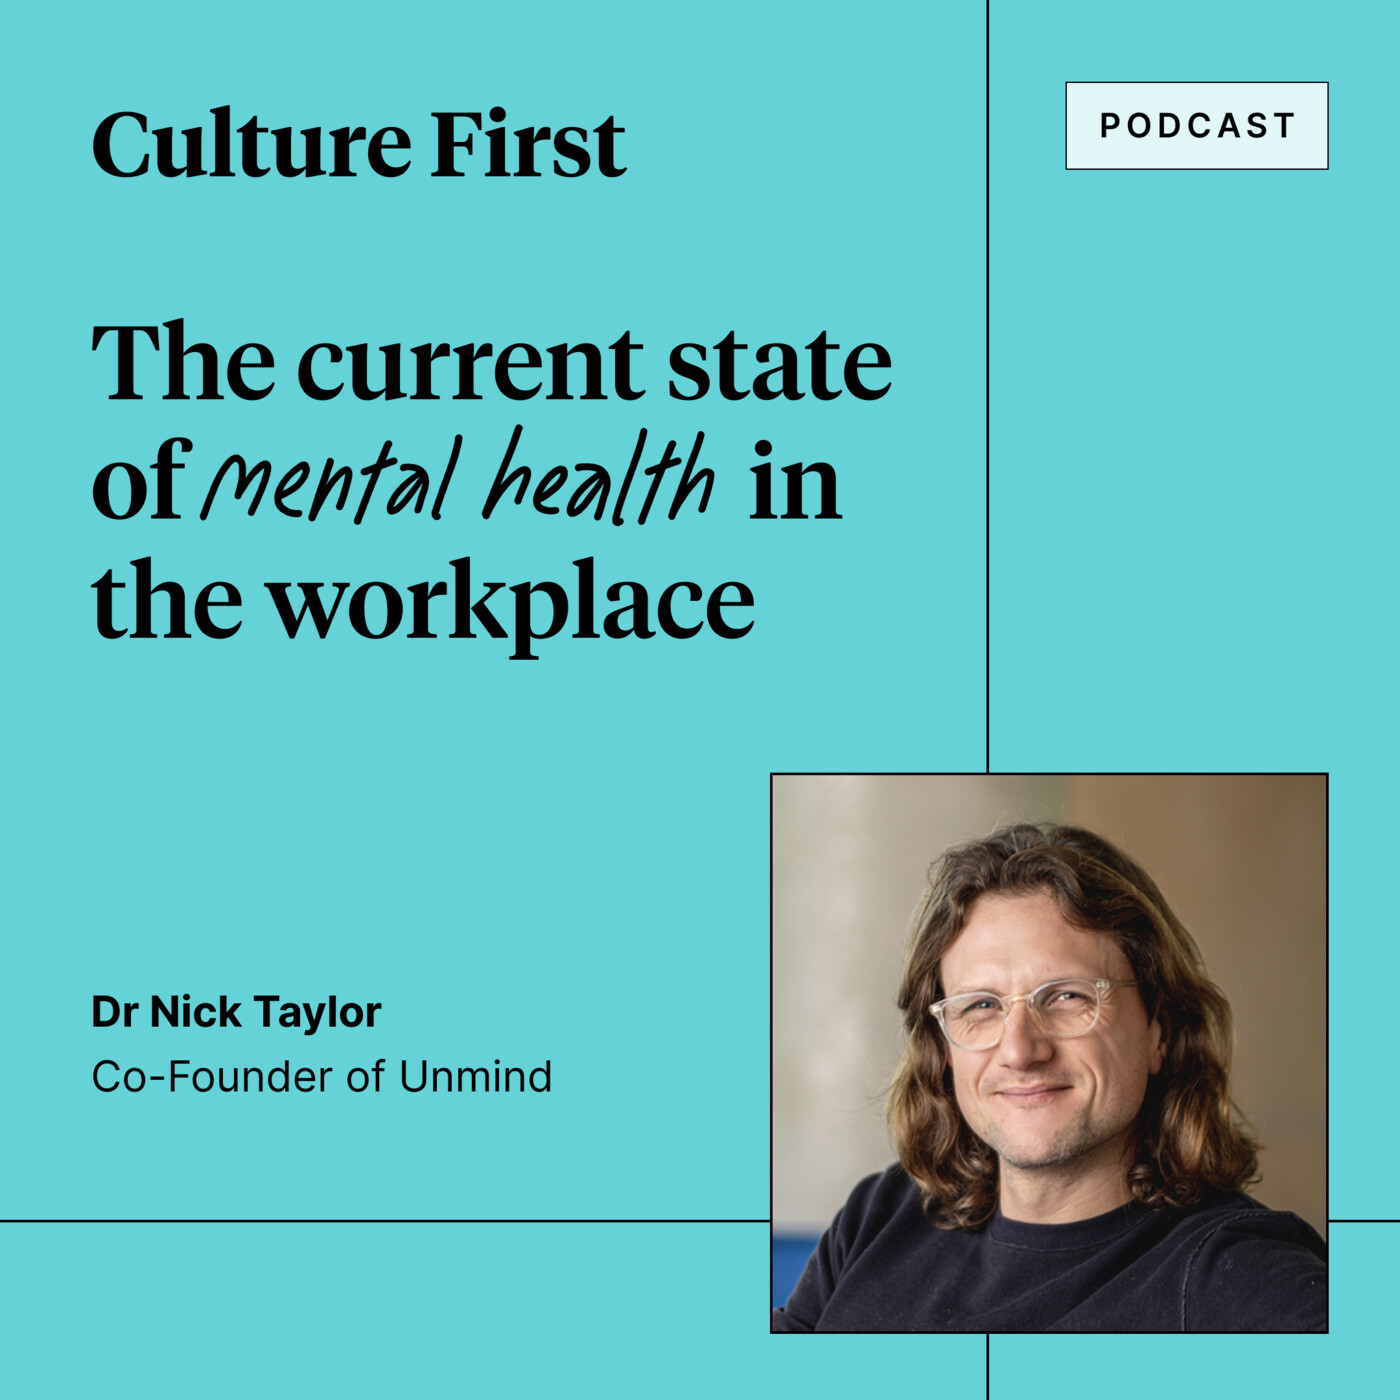 The current state of mental health in the workplace, with Dr Nick Taylor